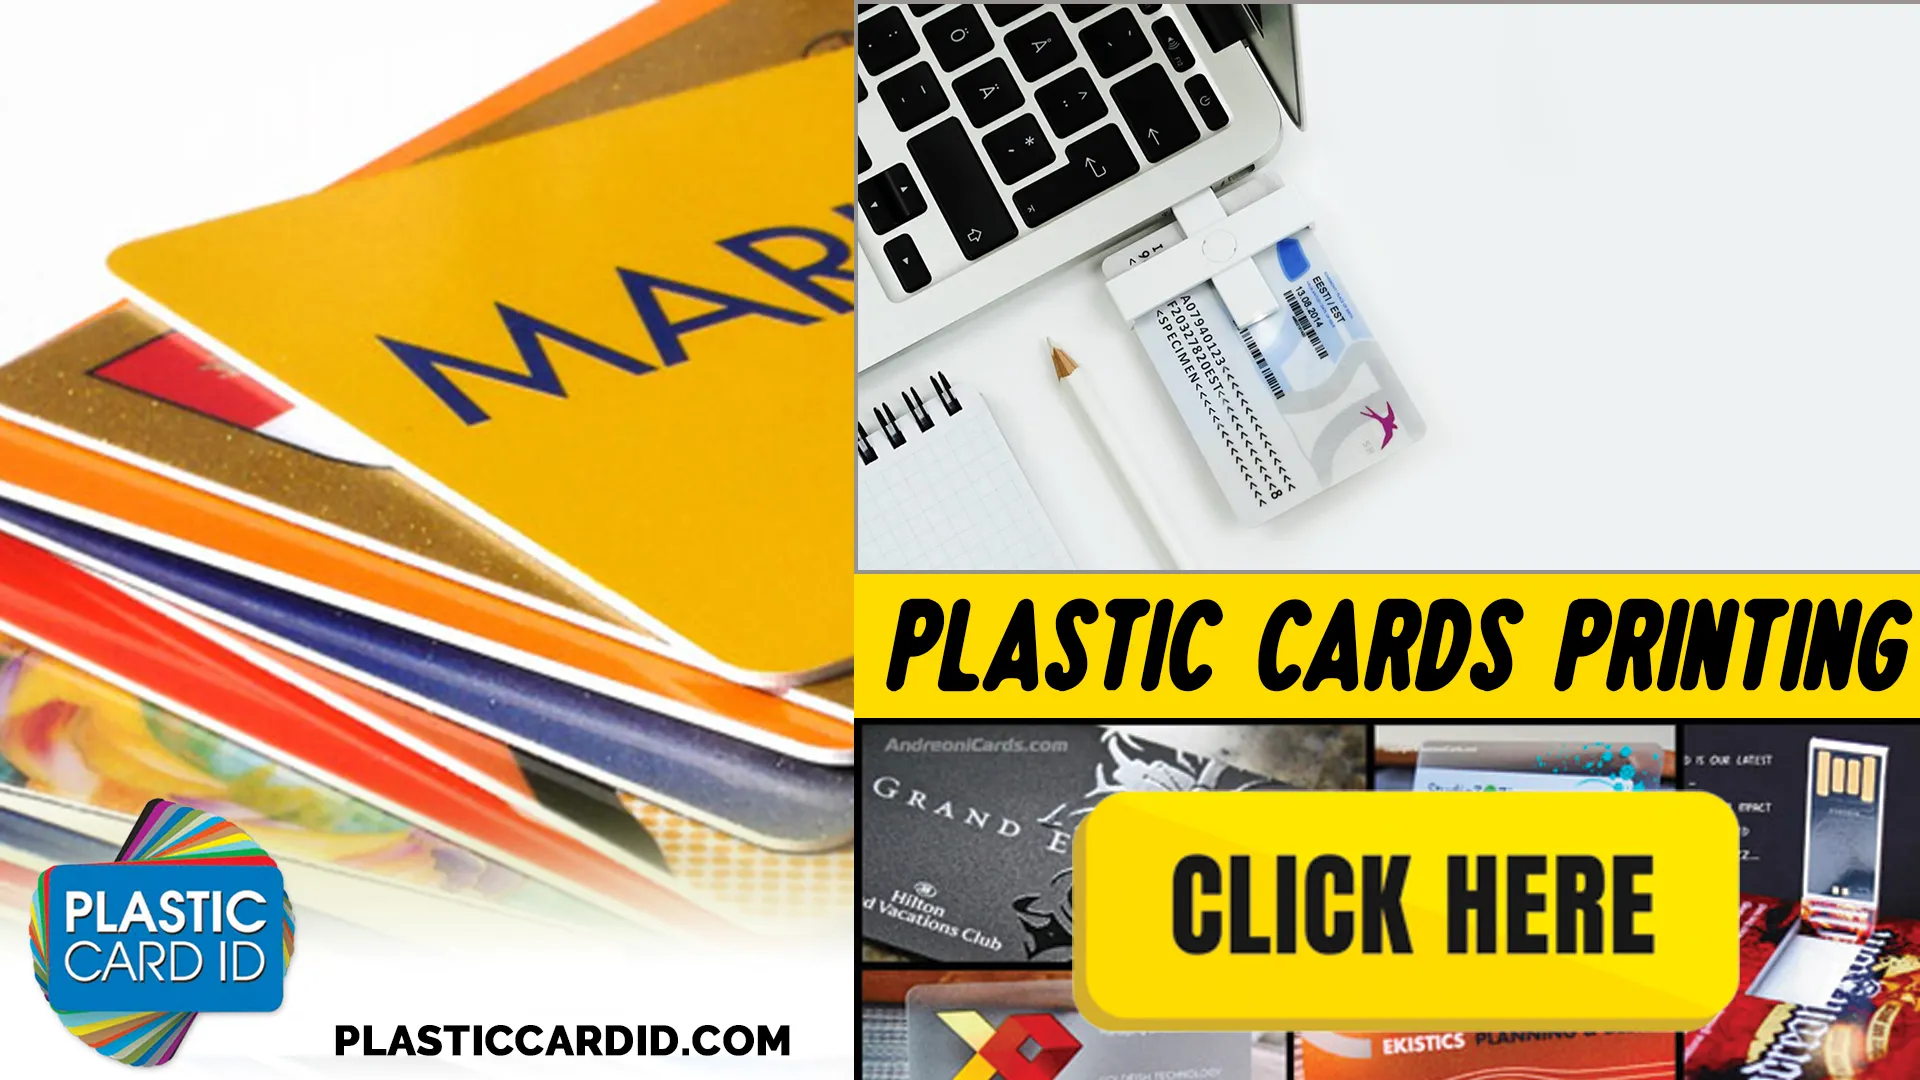 Card Material Quality Impacts on the Environment and Recycling Possibilities